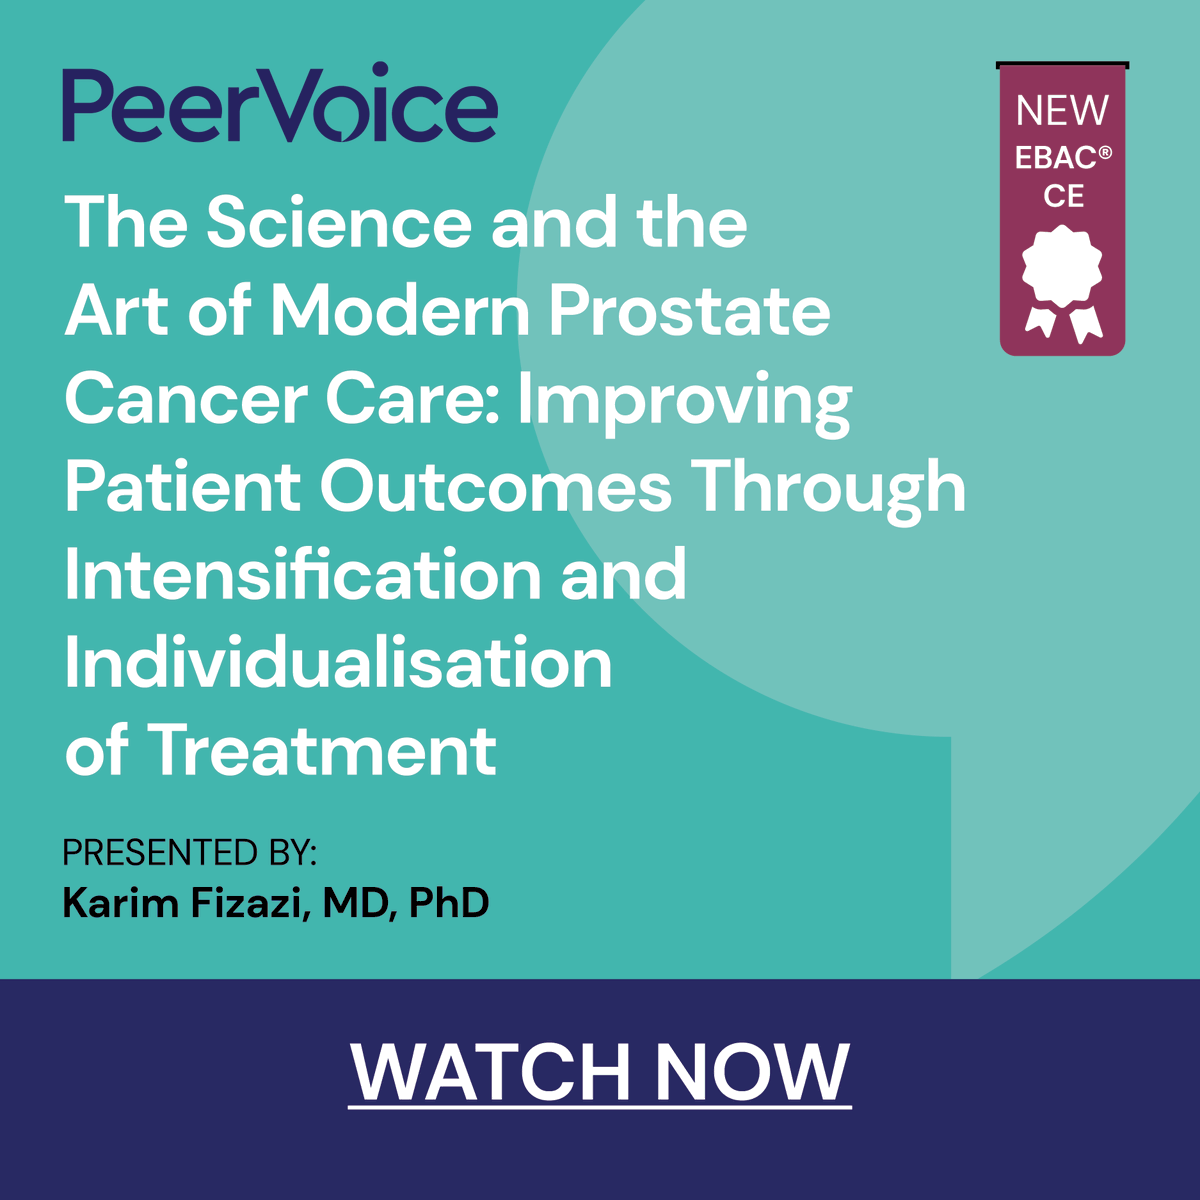 Managing mHSPC and nmCRPC: Get expert insight in a new CE OnDemand from Madrid
#PeerVoice #meded #oncology #urology #prostatecancer

peervoice.com/HHV?PromoCode=…